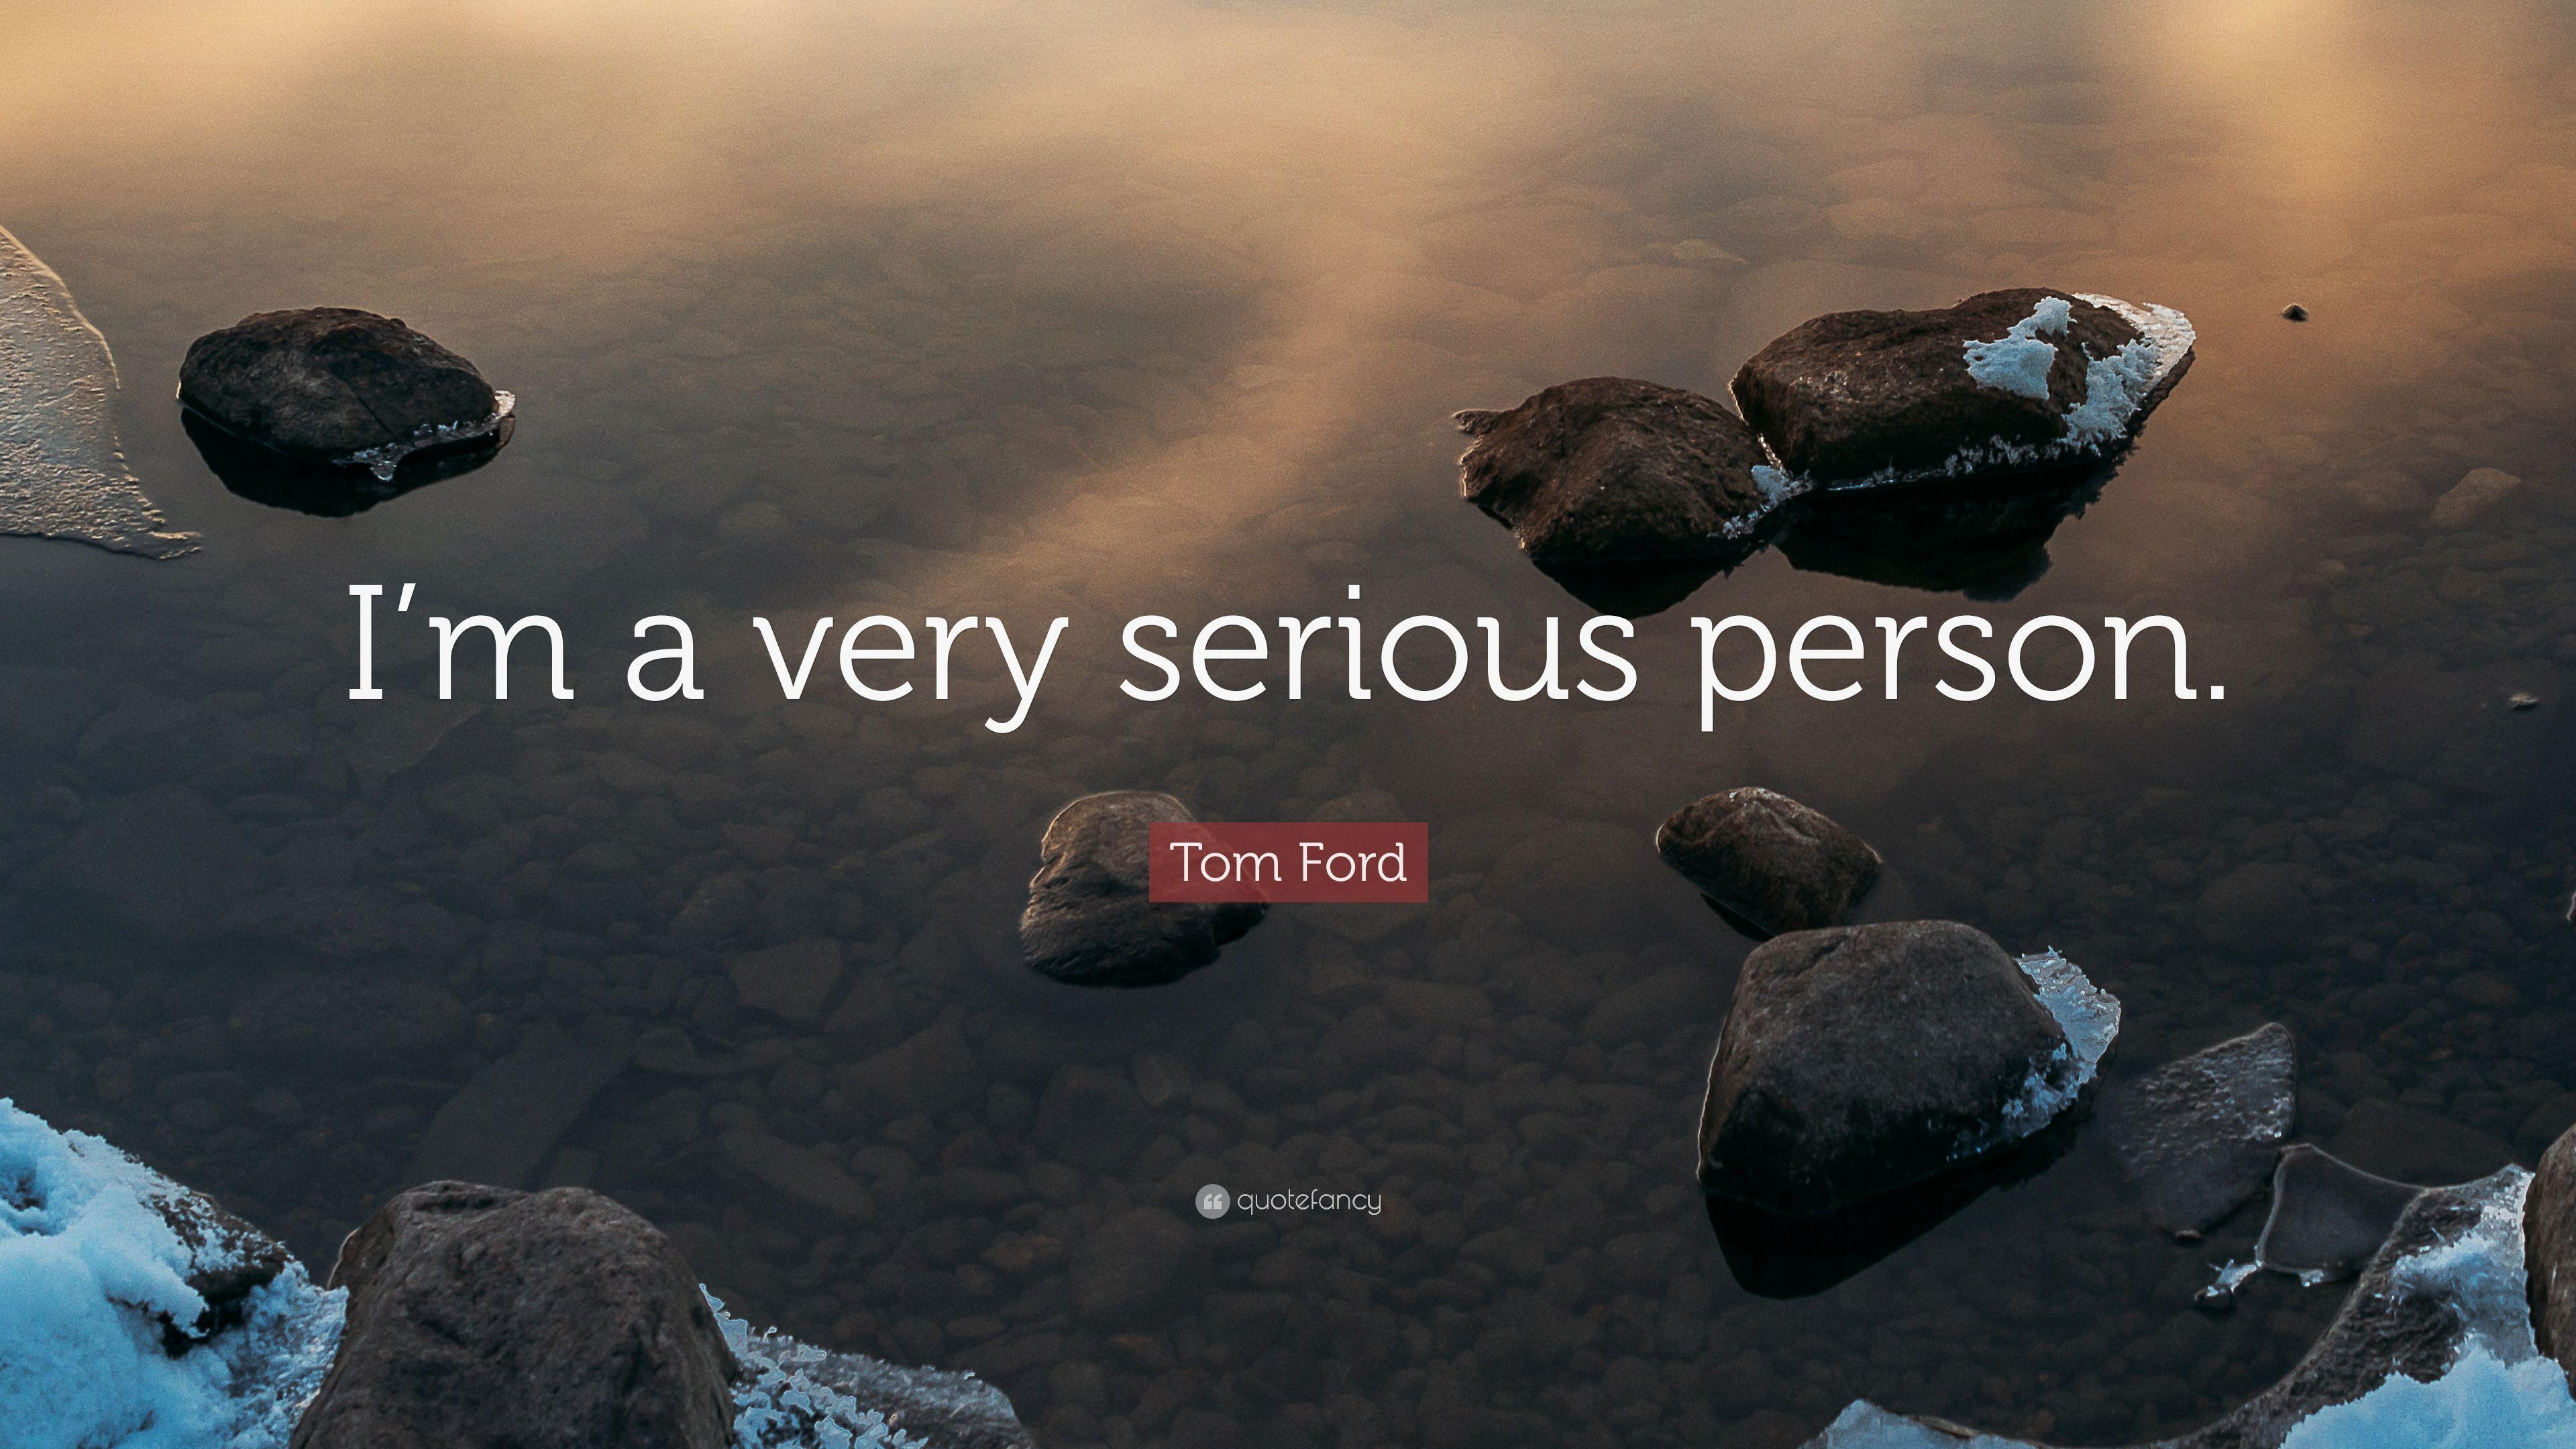 Tom Ford Quote: “I'm a very serious person.” (7 wallpaper)